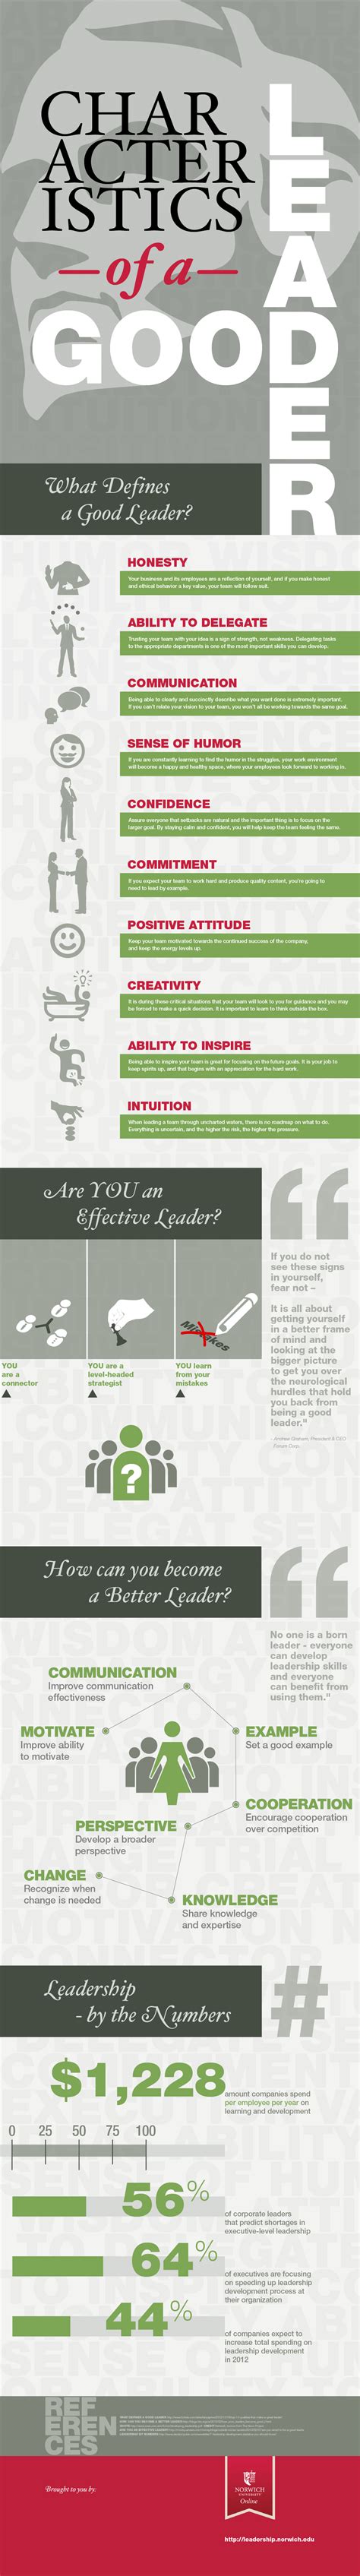 There are different strategies for obtaining and executing the most effective leadership along with different styles of management. Characteristics of a Good Leader Infographic